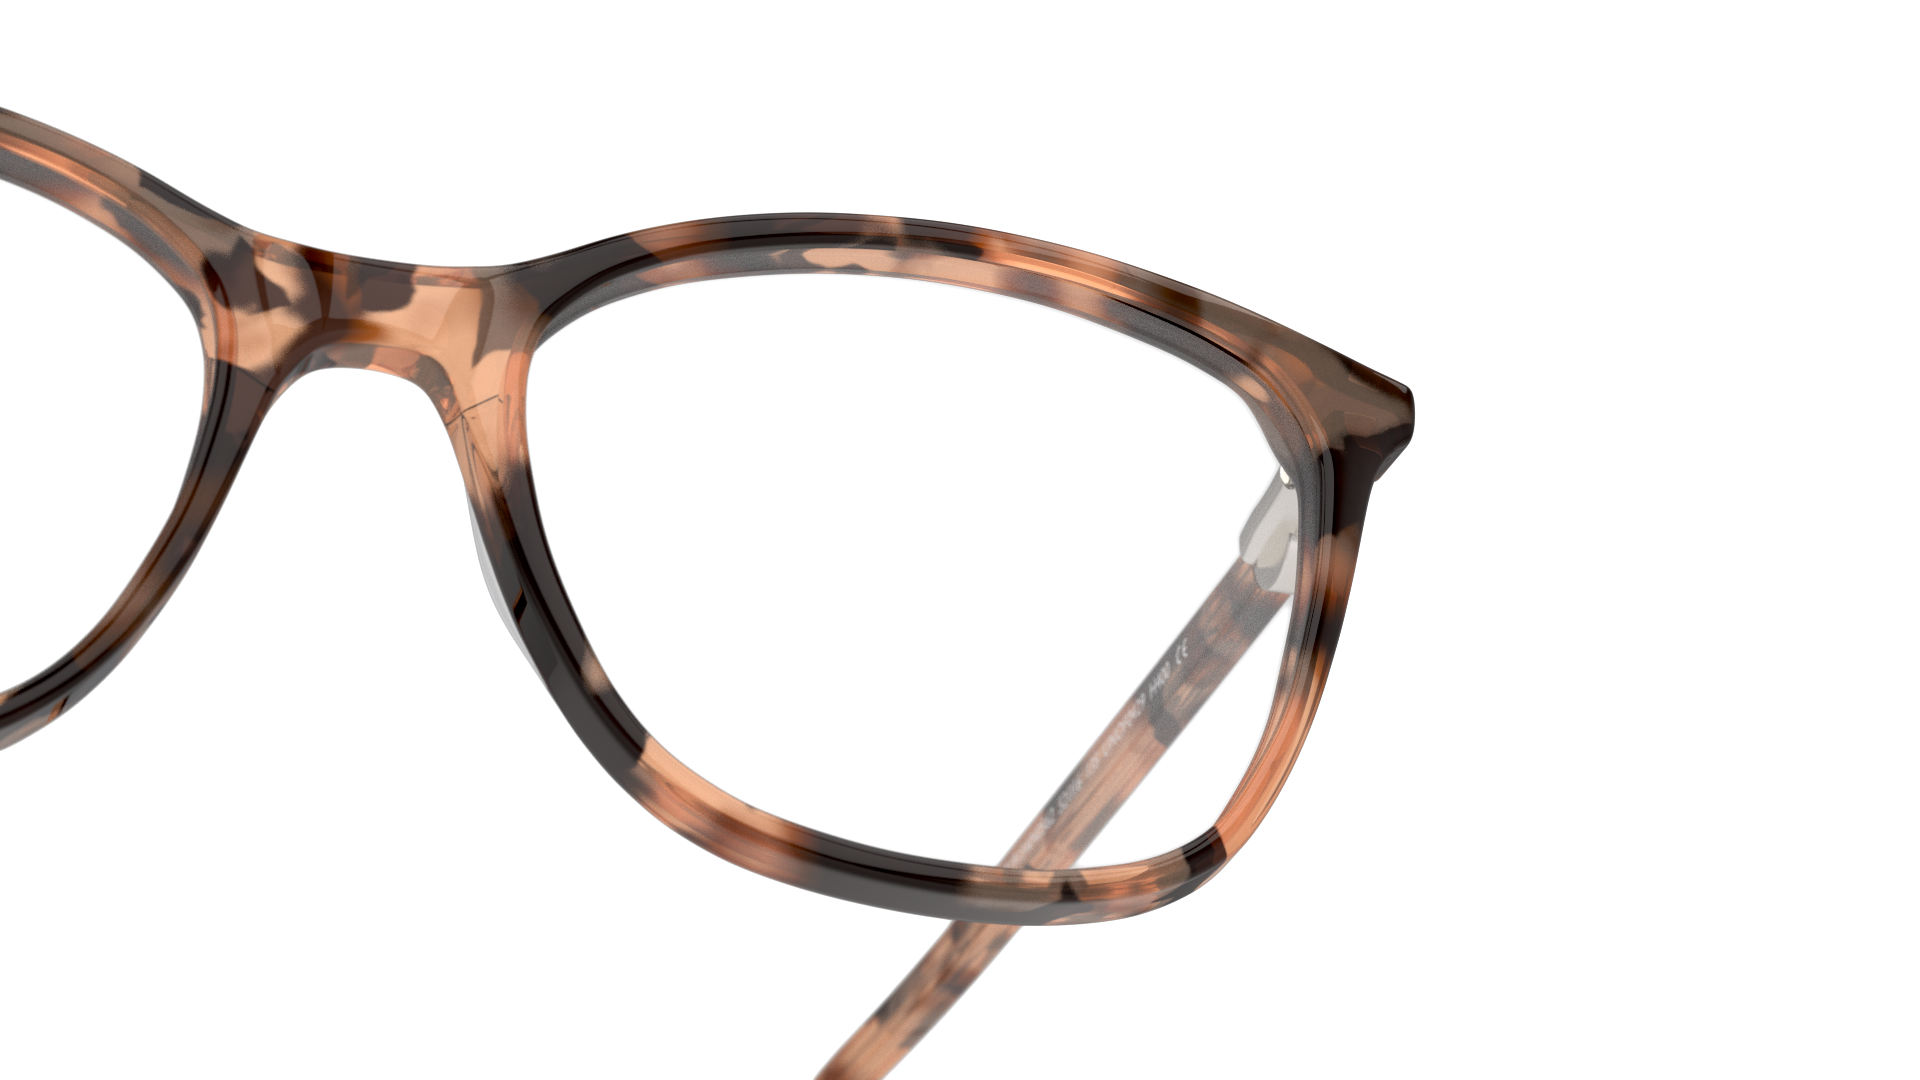 Detail01 Unofficial UNOF0429 (HH00) Glasses Transparent / Tortoise Shell